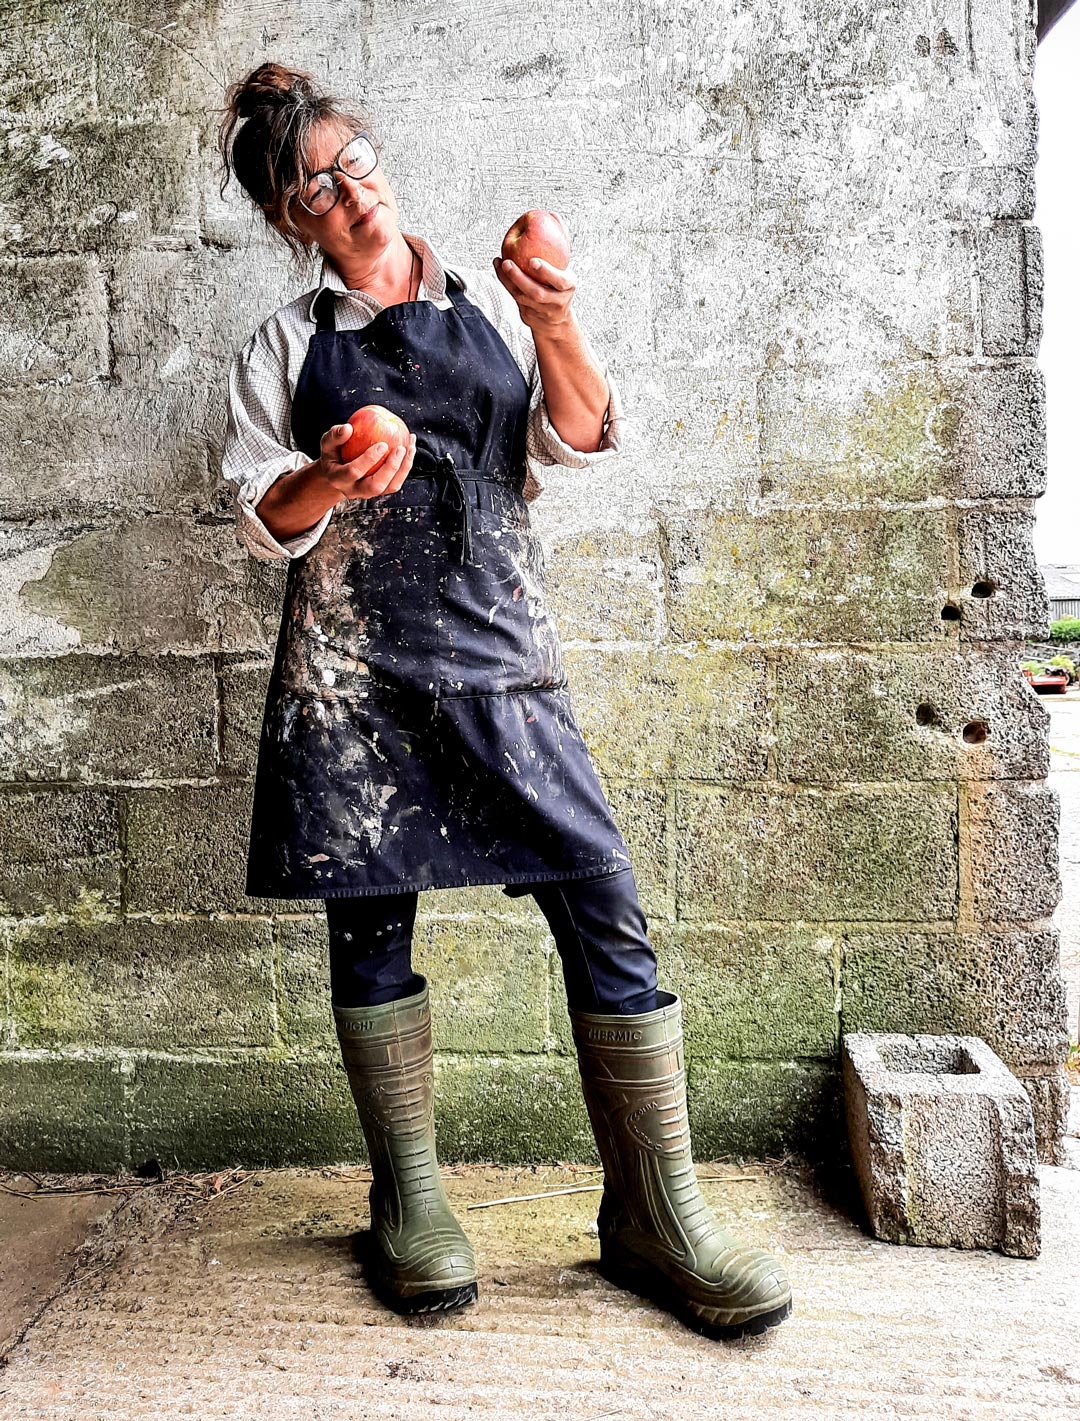 Lottie Sweeney with Fuji, an apple model commissioned by the Museum of Cider for Apples & People. Photograph Neil Tustian ©